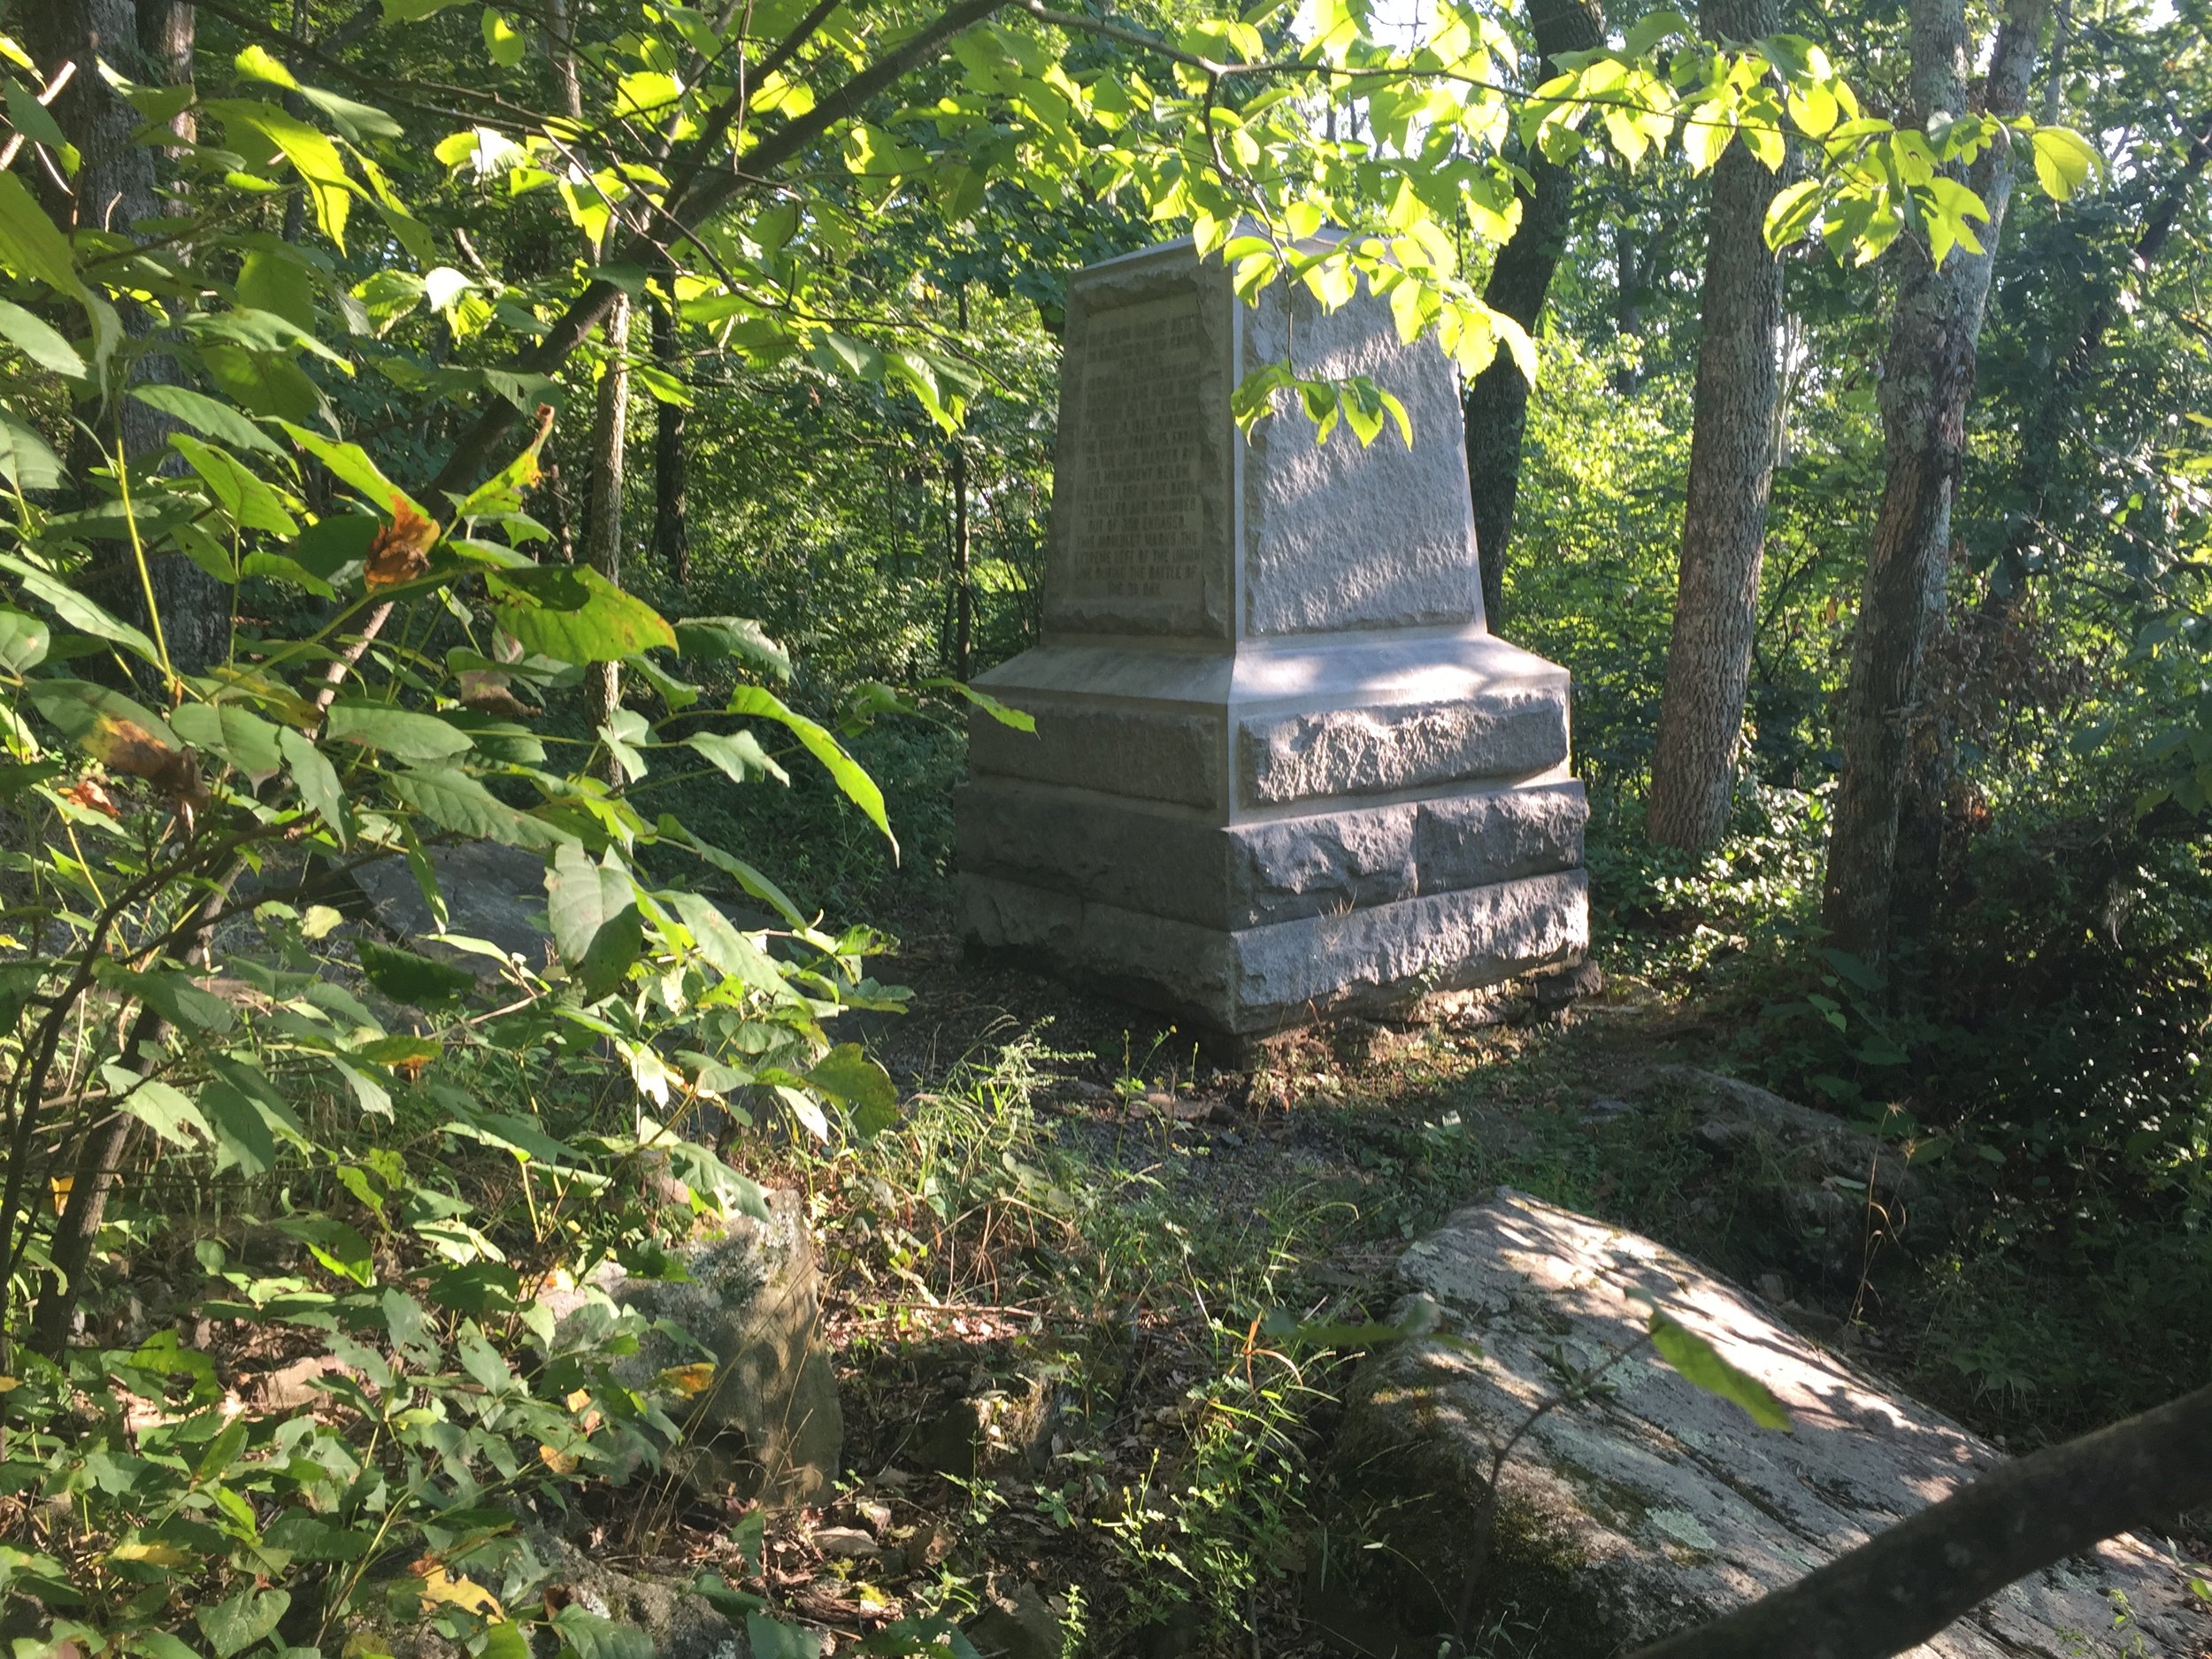  A monument marking the position of the right flank of Lieutenant Colonel Joshua Lawrence Chamberlain's 20th Maine brigade on Big Round Top. 